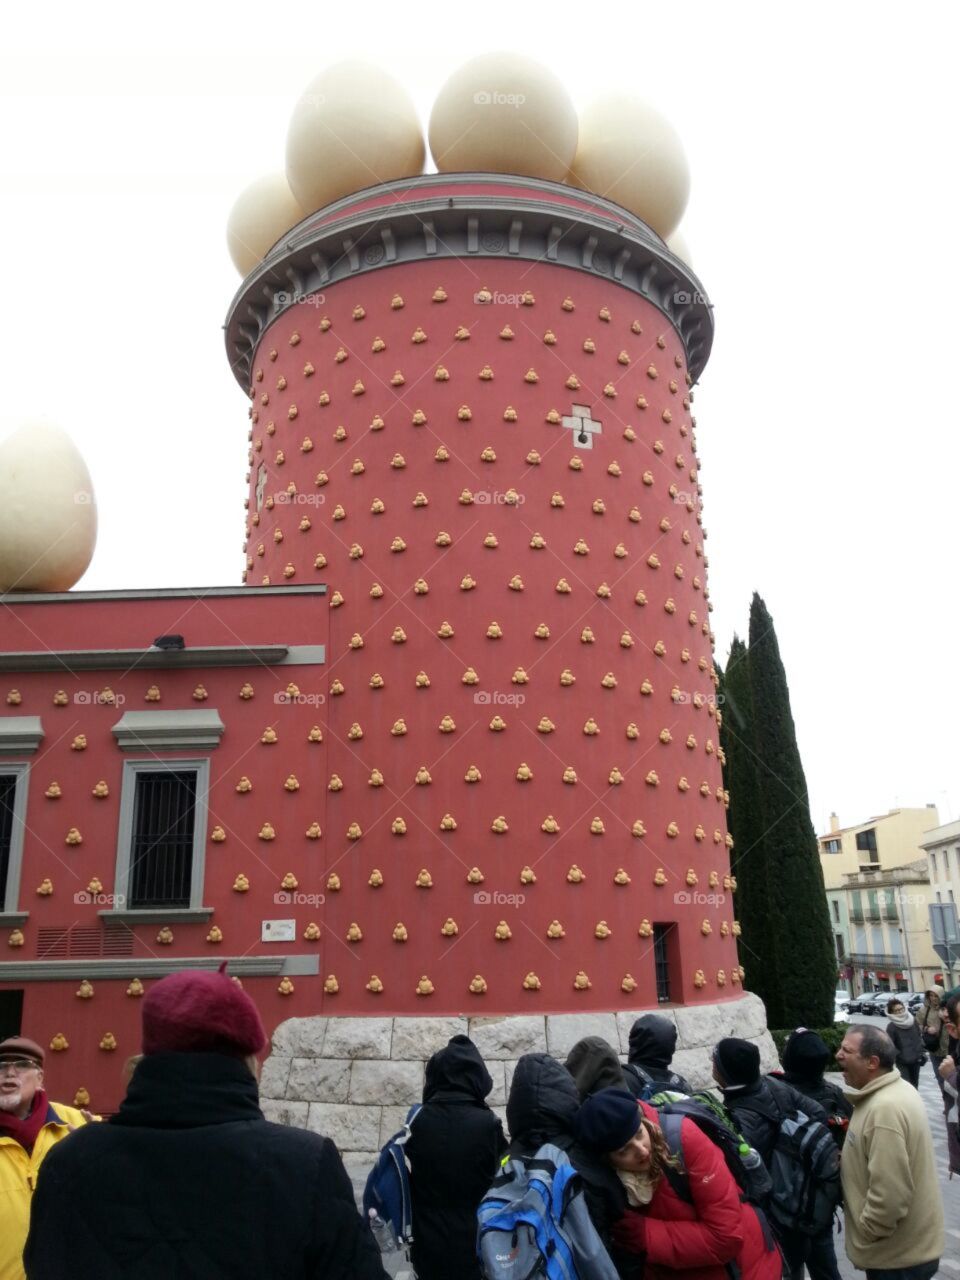 Tower. The red tower